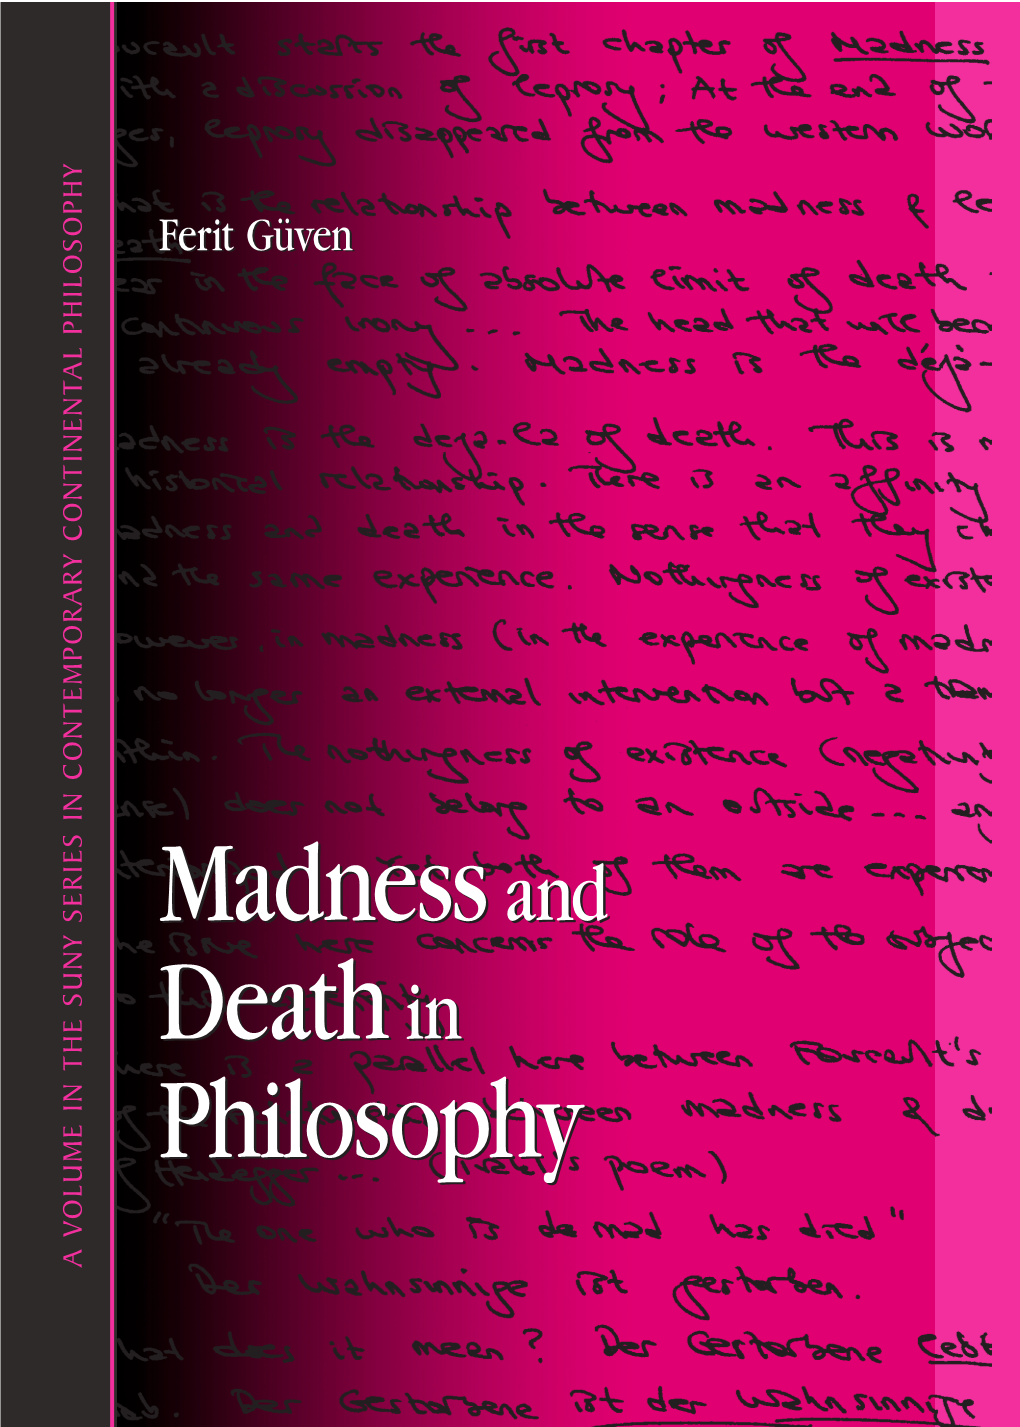 Madness and Death in Philosophy SUNY SERIES in CONTEMPORARY CONTINENTAL PHILOSOPHY